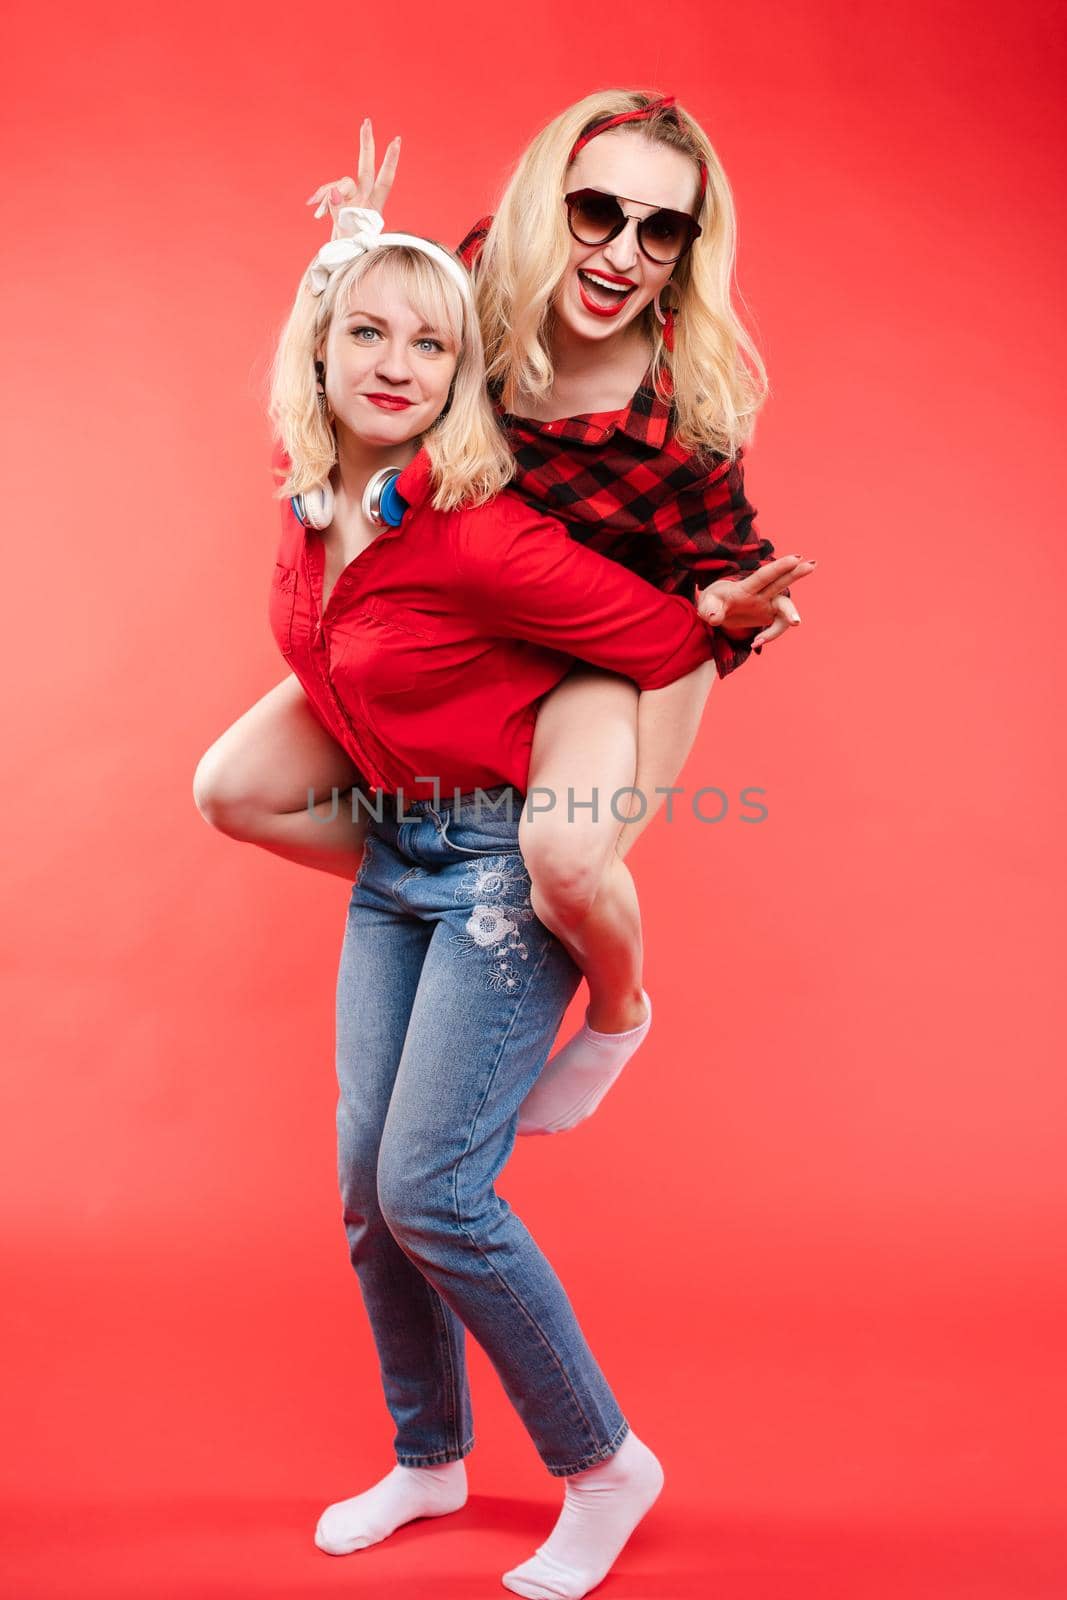 Two best female friends posing together on red background by StudioLucky